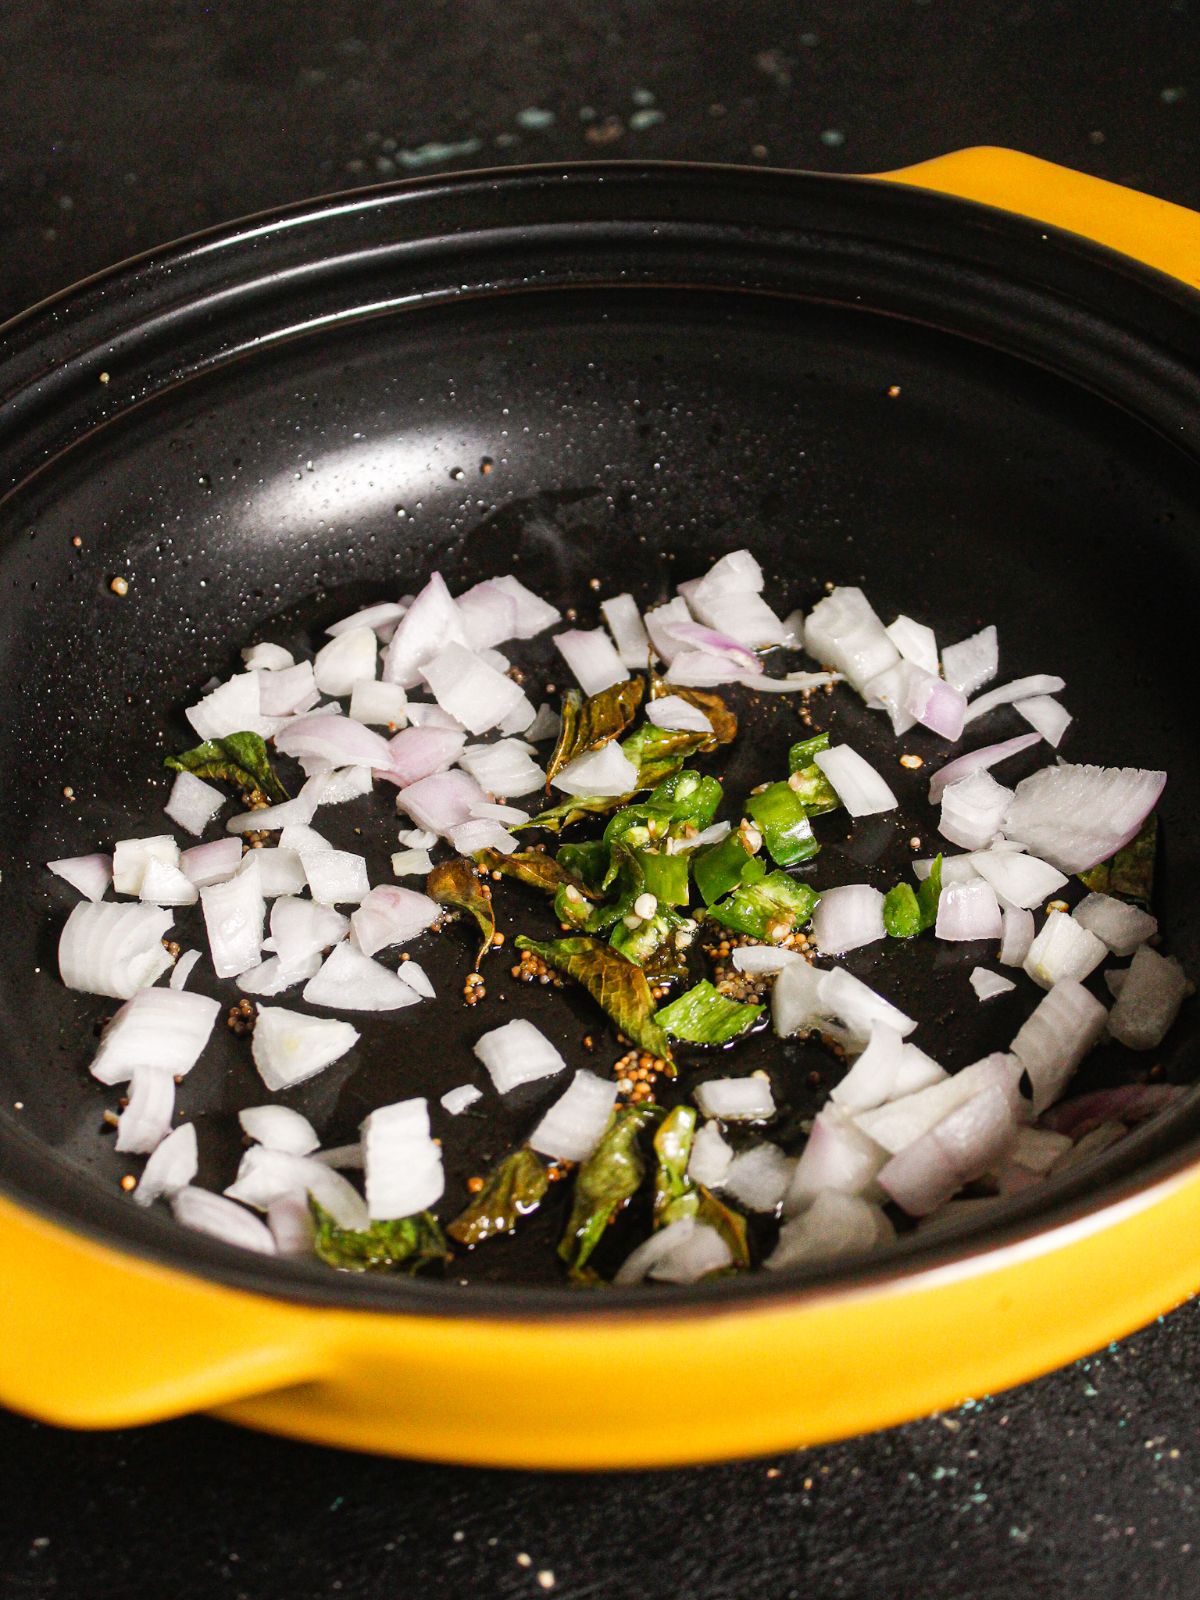 Add chopped onions and chillies to the pan and saute 